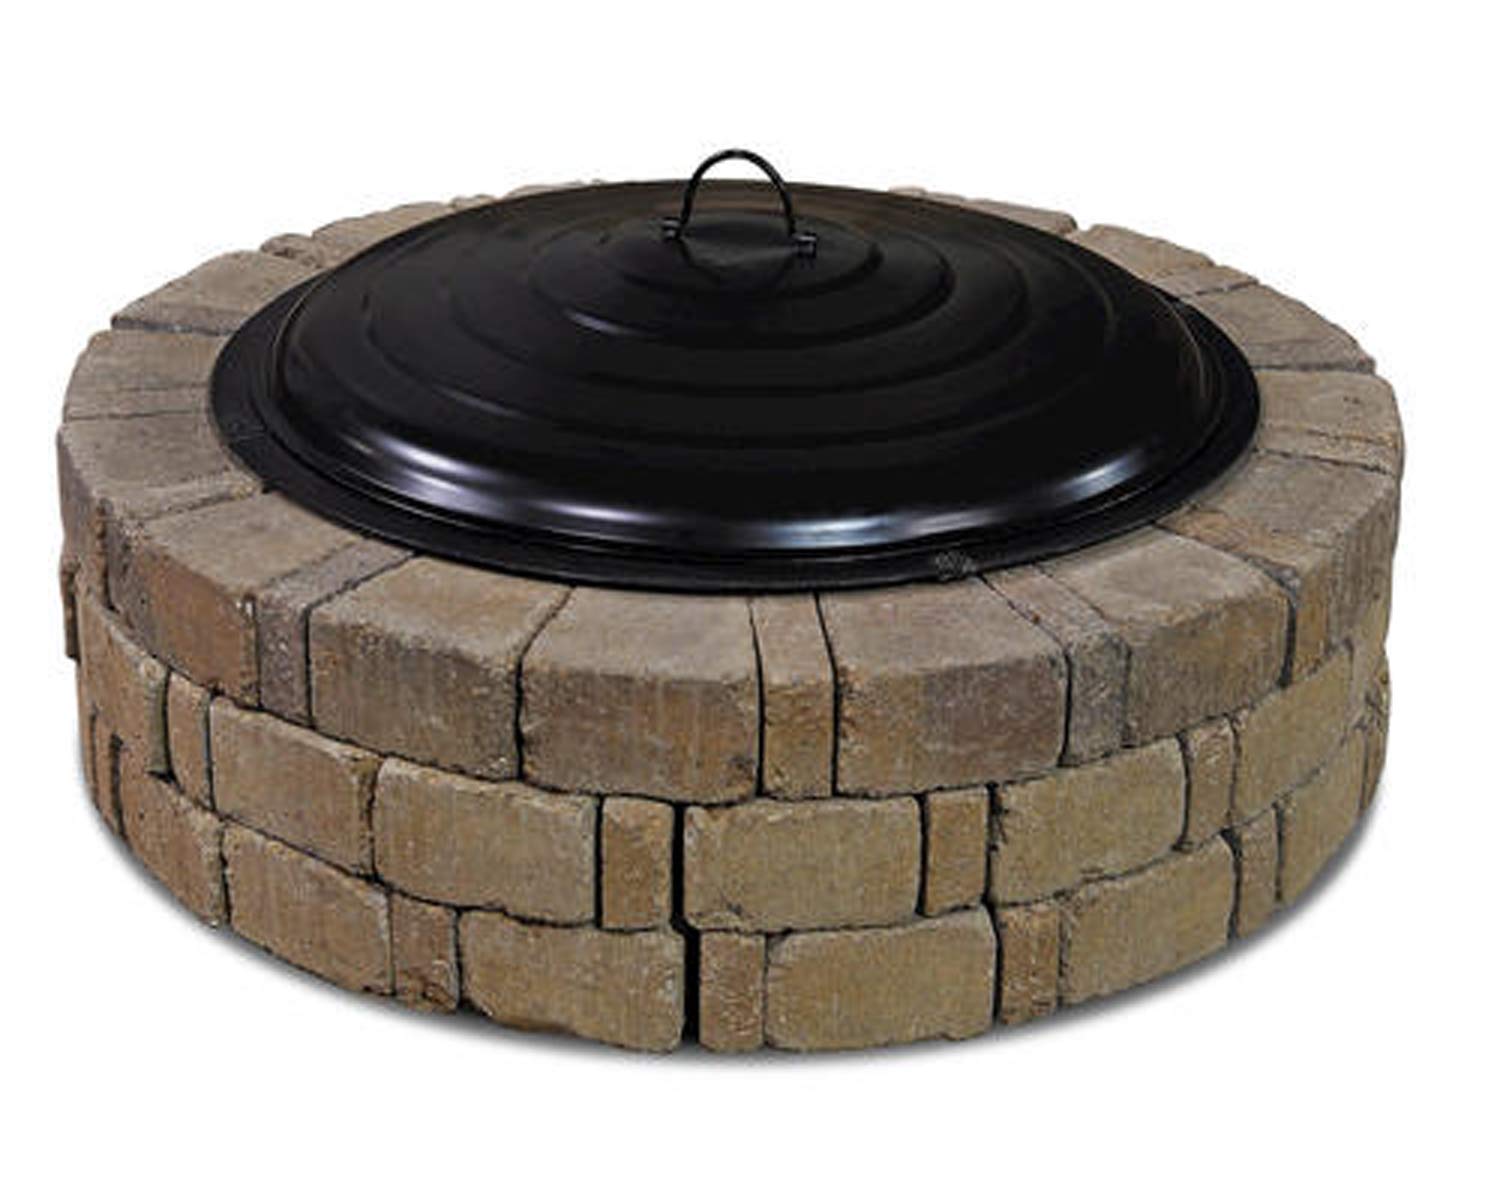 Backyard Creations 31 inch Fire Ring Lid Outdoor Fireplace | Durable Steel, Black